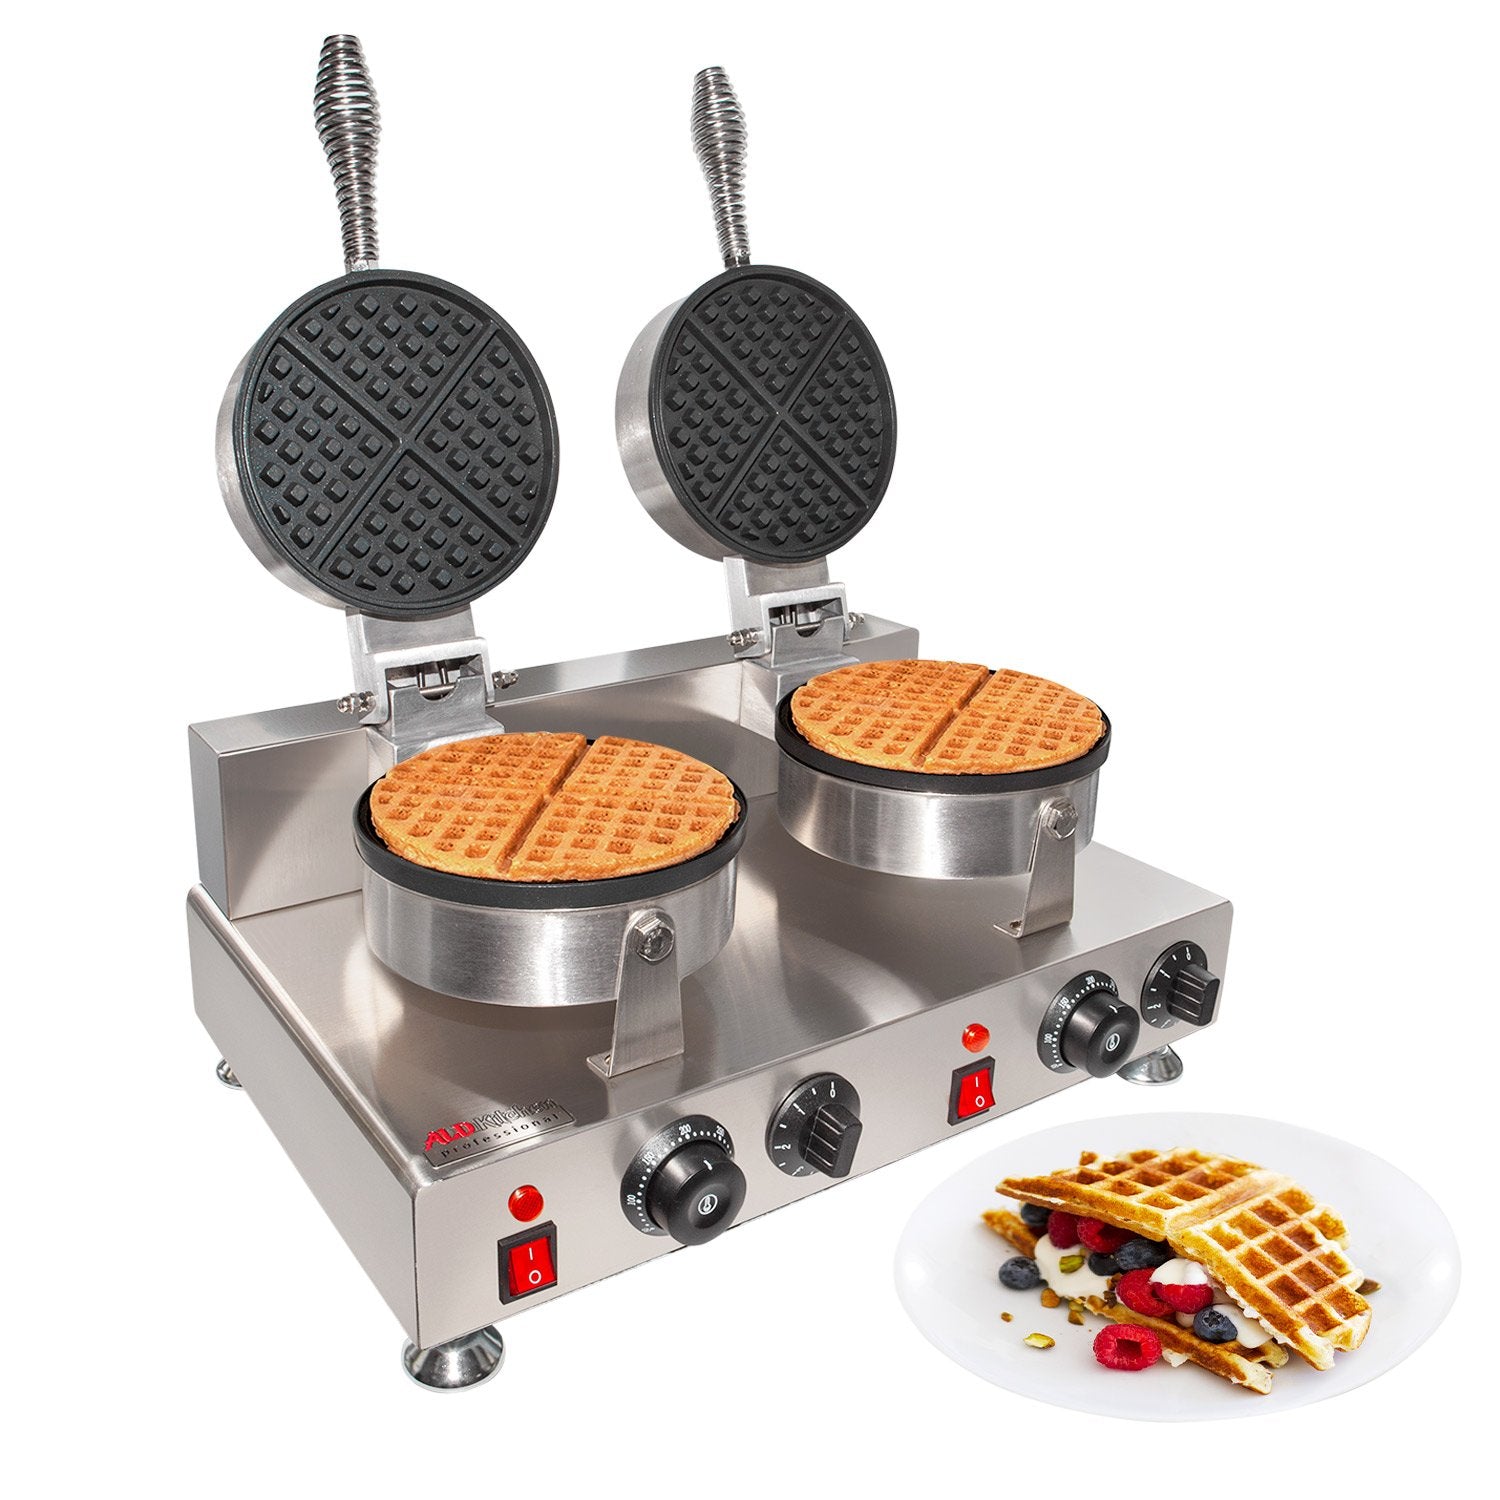 Belgian Waffle Maker | Cone Maker and Waffle Iron | Round-Shape Thin Waffles | Stainless Steel